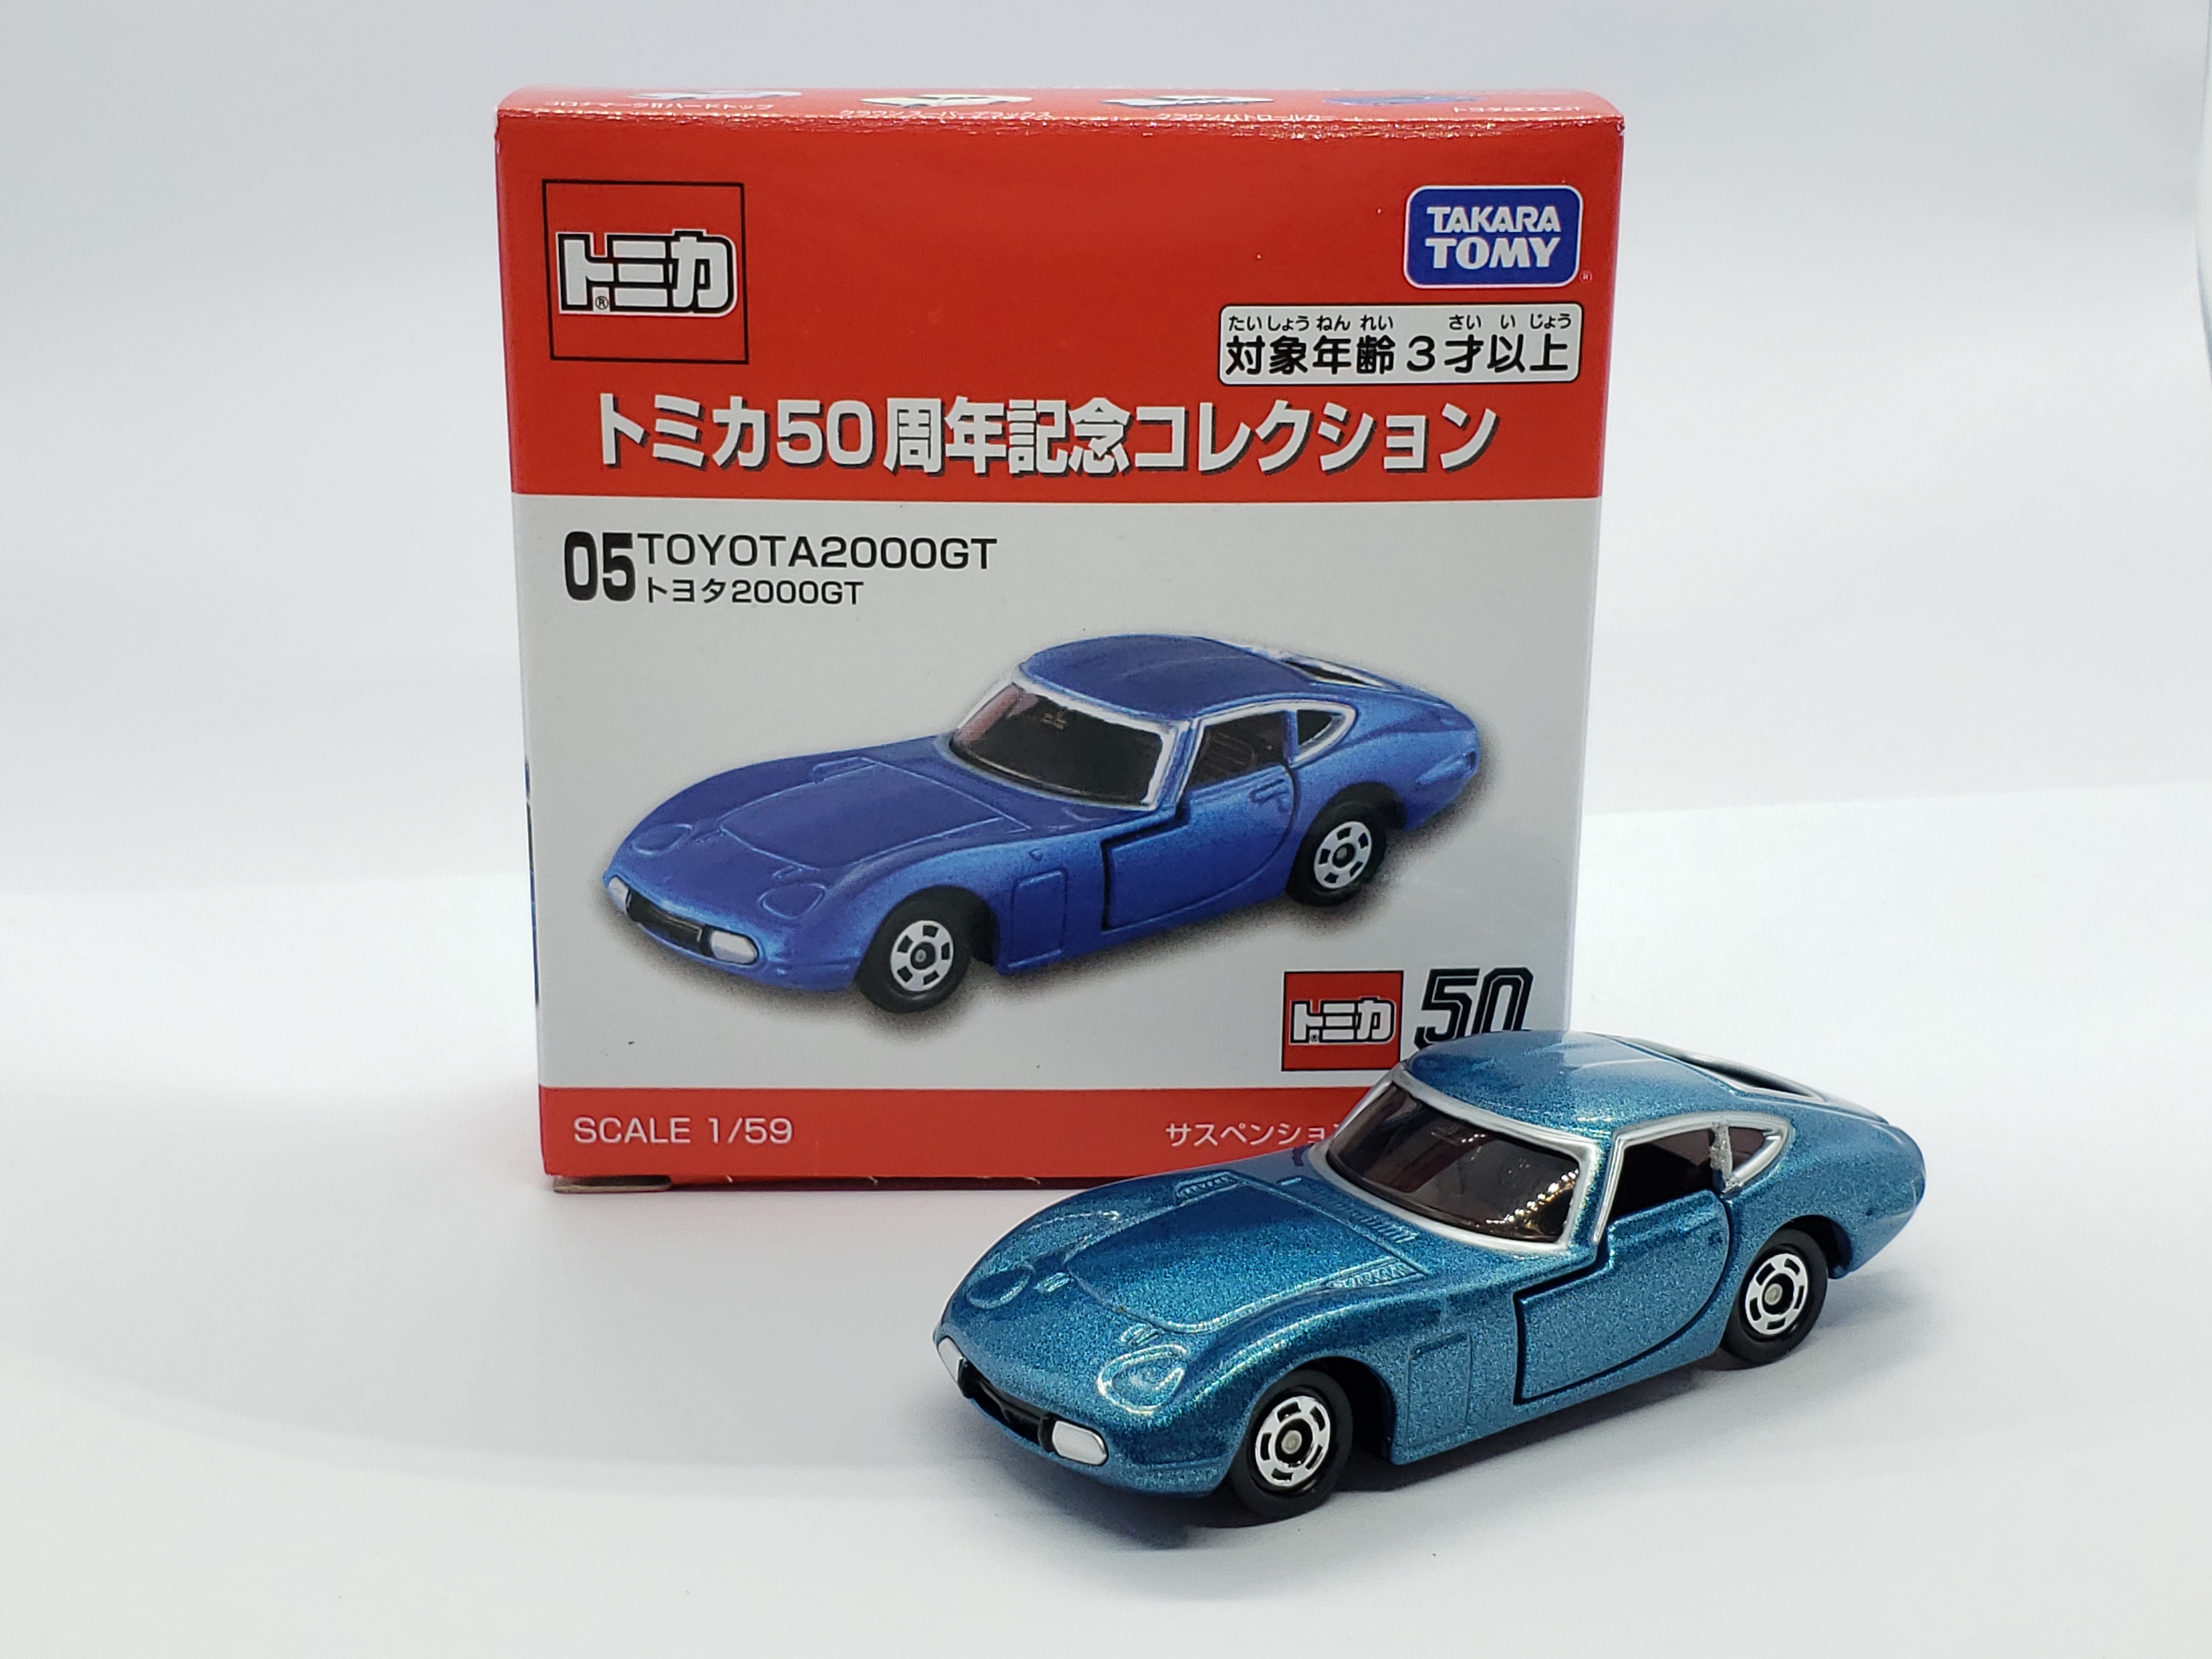 Tomica 50th Anniversary Collection - 05 Toyota 2000GT